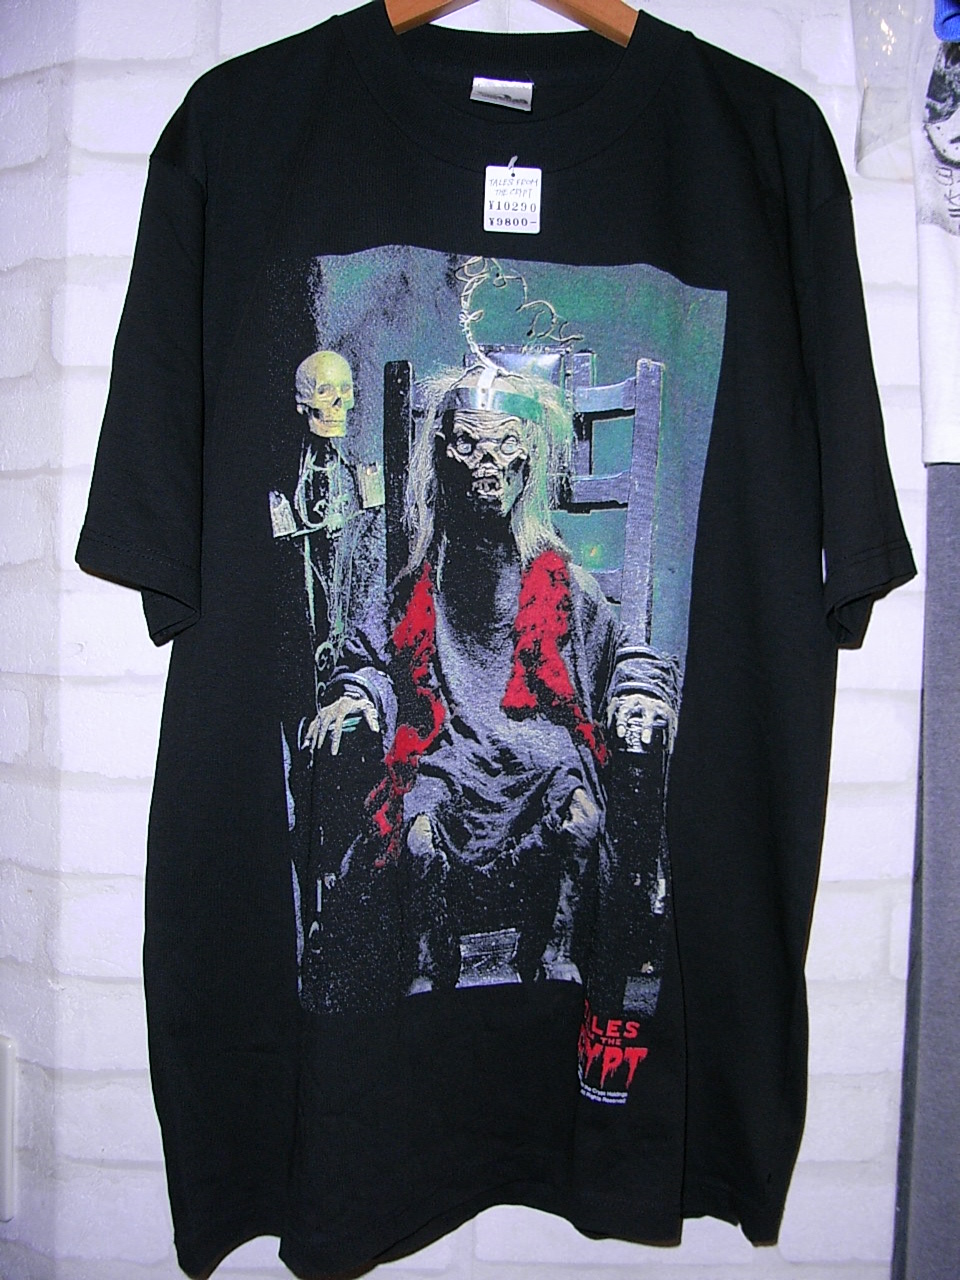 TALES FROM THE CRYPT ホラーTシャツ 94年 : 高円寺・古着屋・マッド 